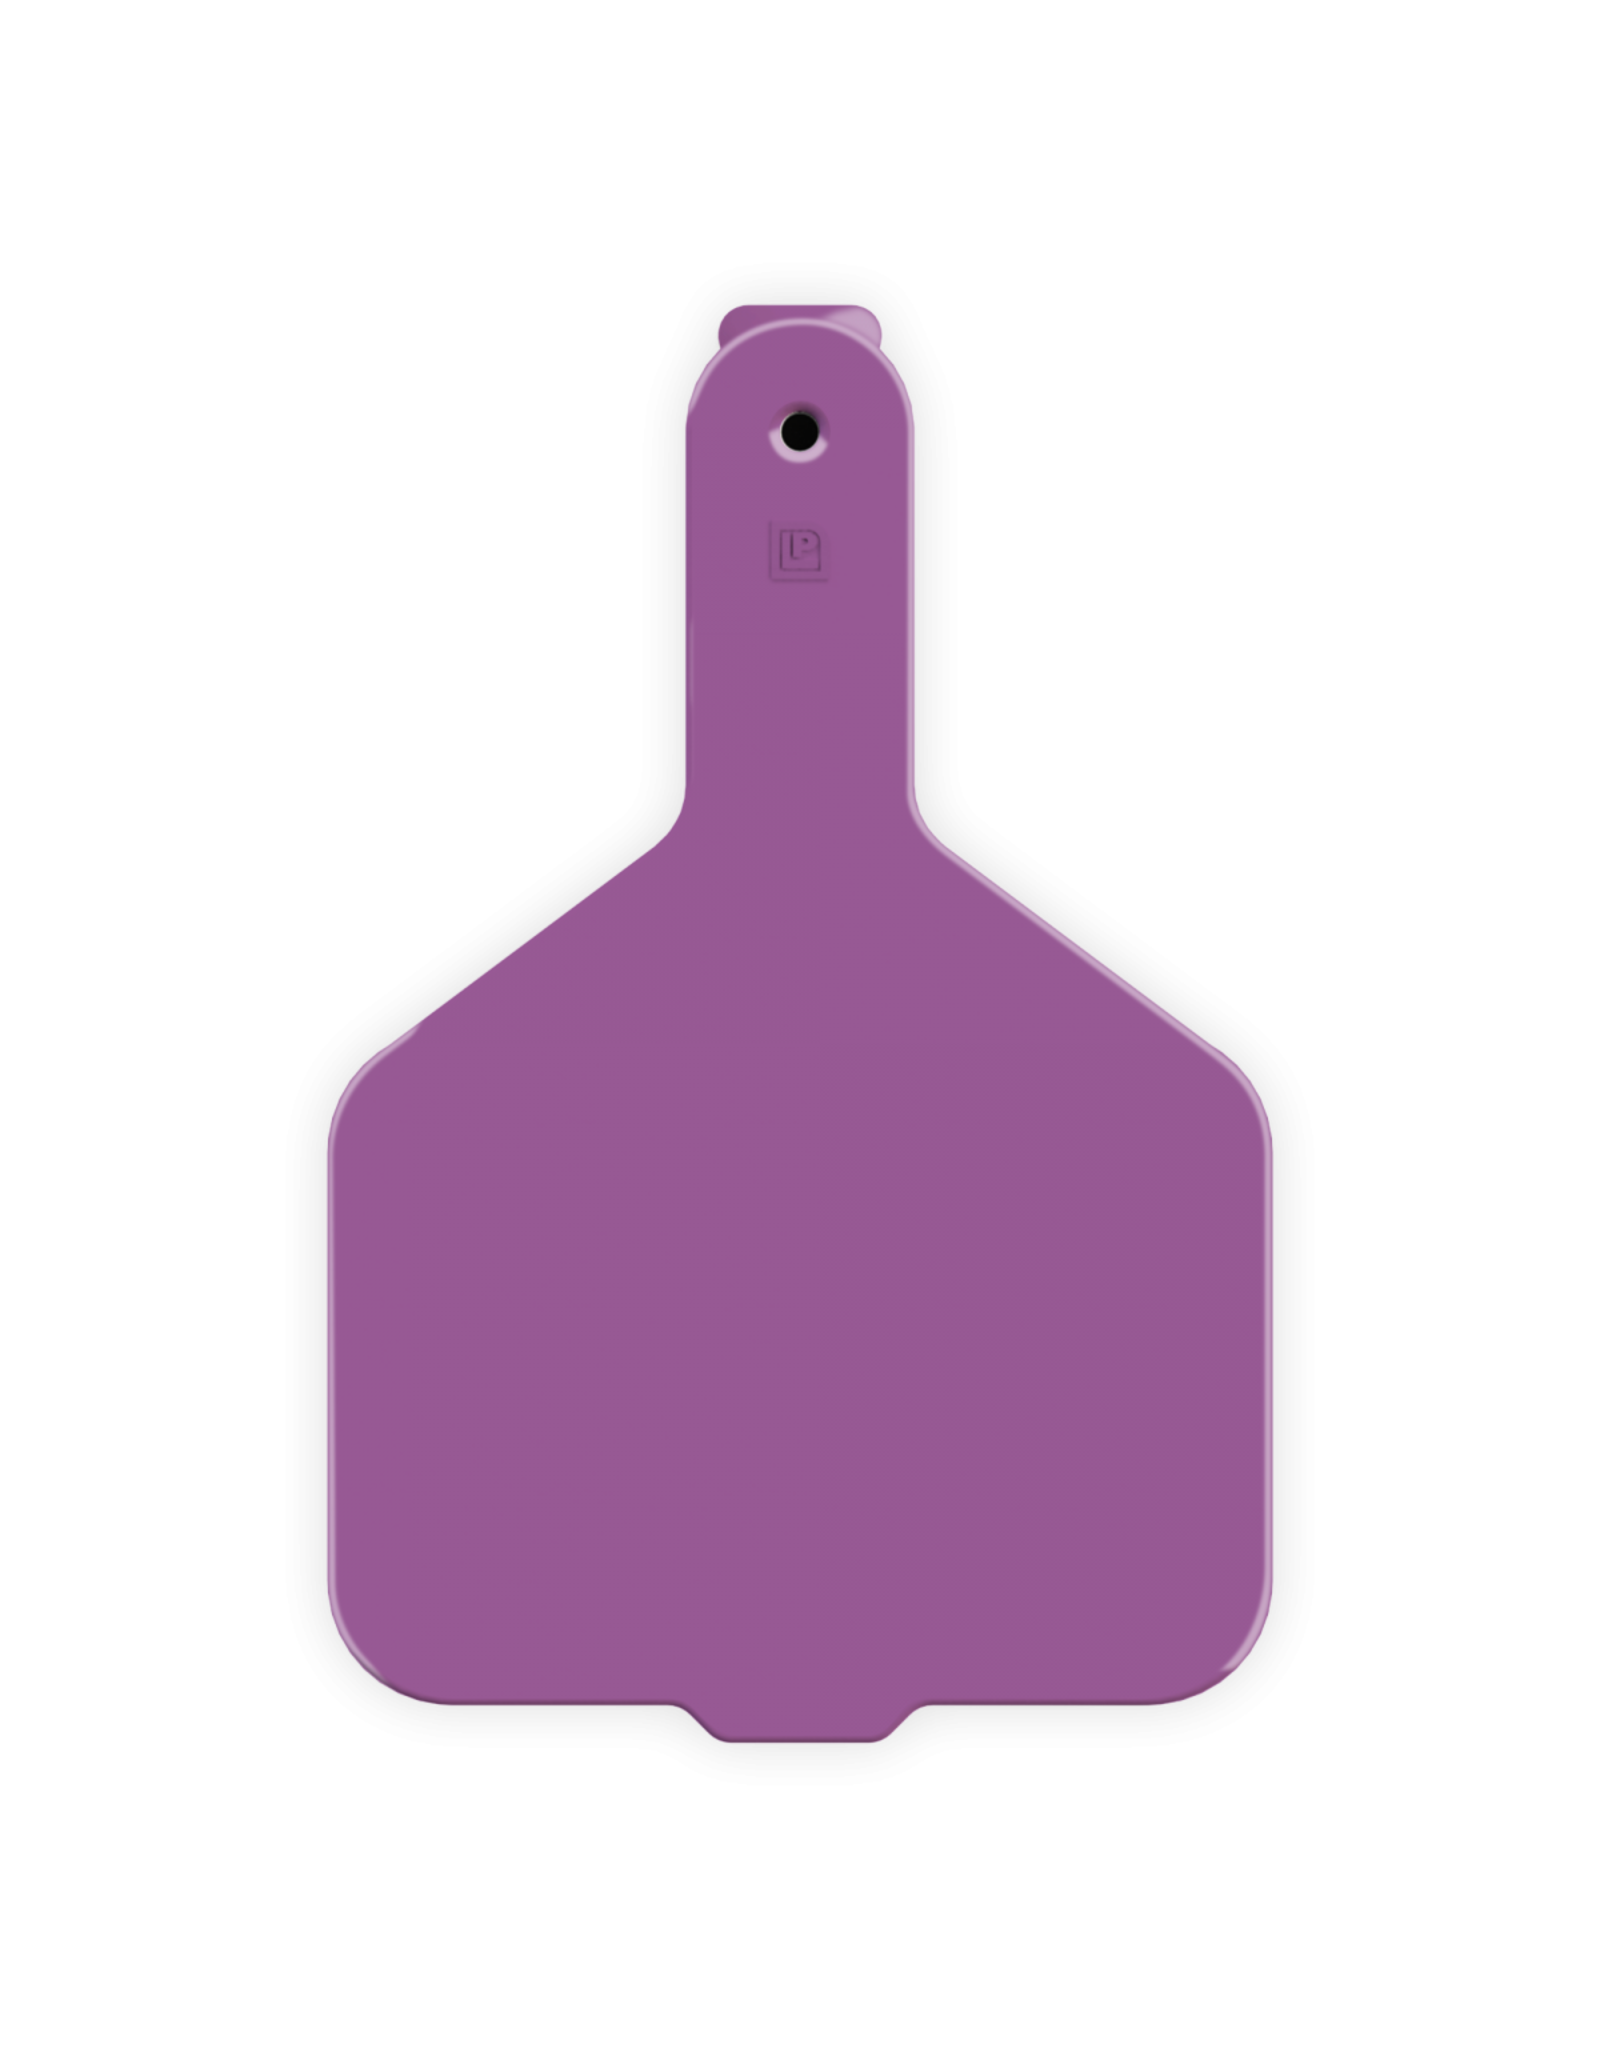 Leader TAG* LEADER 1 PC COW TAGS 25's - Purple CTW3 Wide Neck -75.50 (w) x 114.00 (h) x 21.05 (d) mm